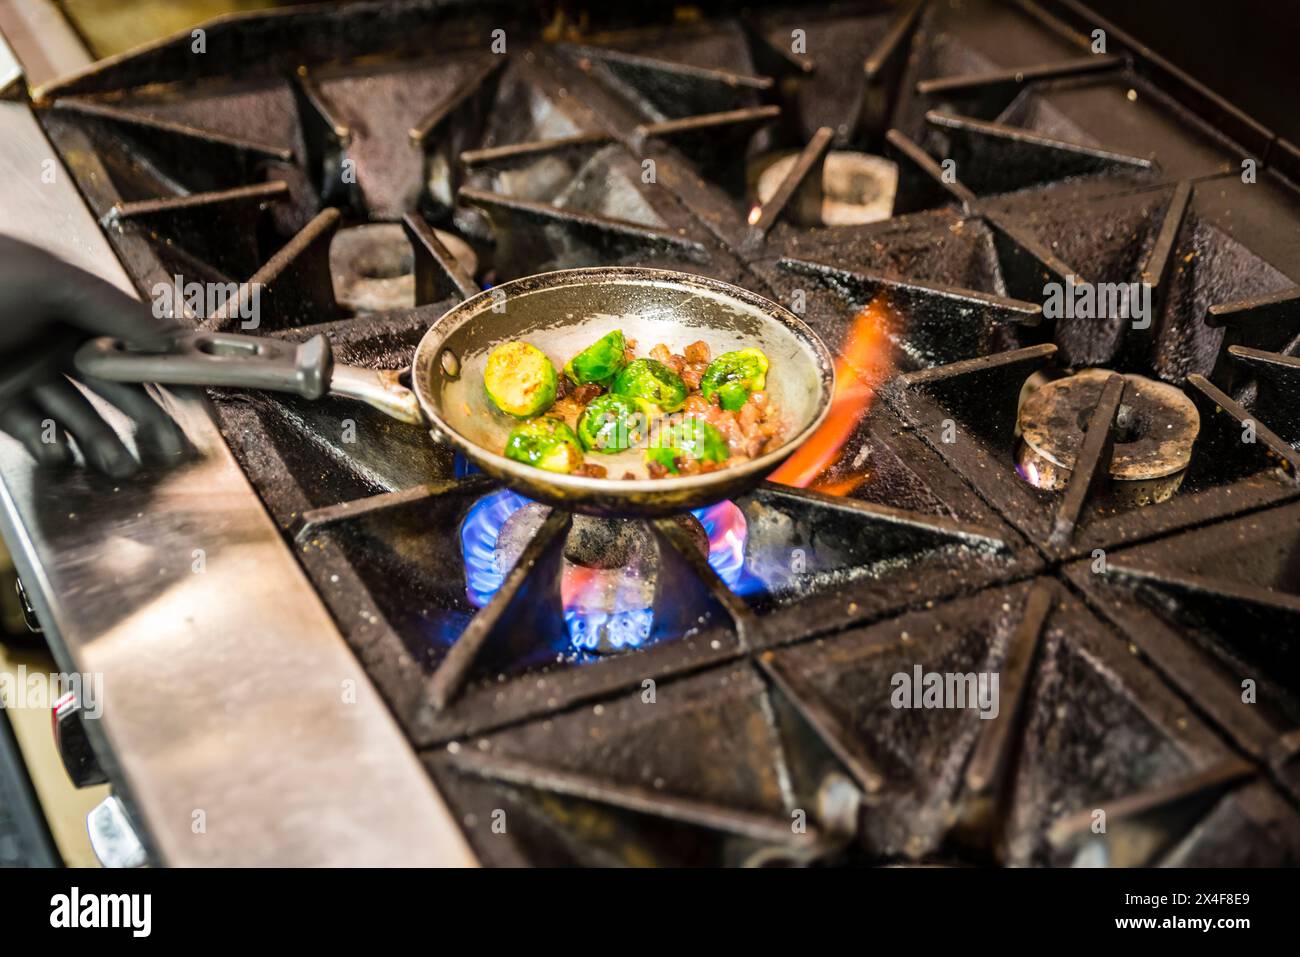 USA, Washington State, Richland. Sauteed brussels sprouts at Drumheller's Food & Drink. (Editorial Use Only) Stock Photo